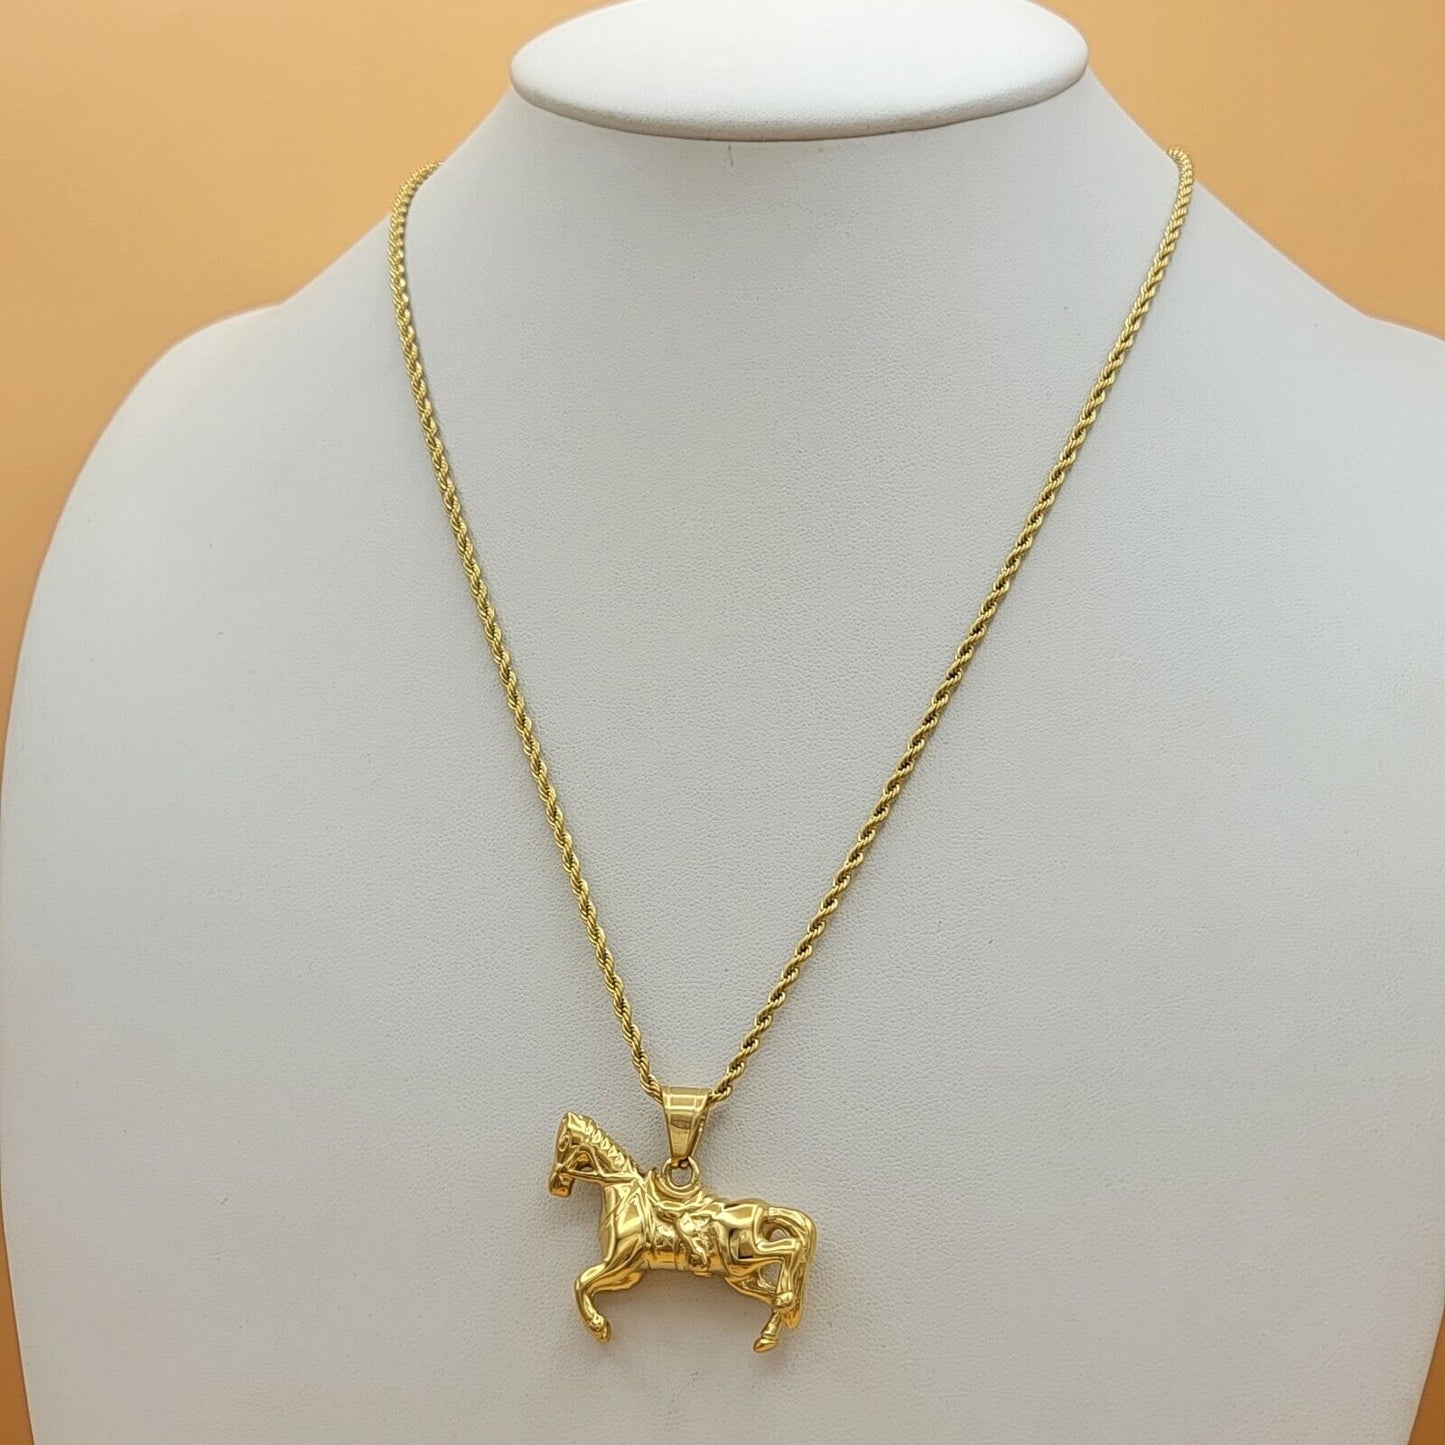 Necklaces - Stainless Steel Gold Plated. Horse Pendant & Chain.